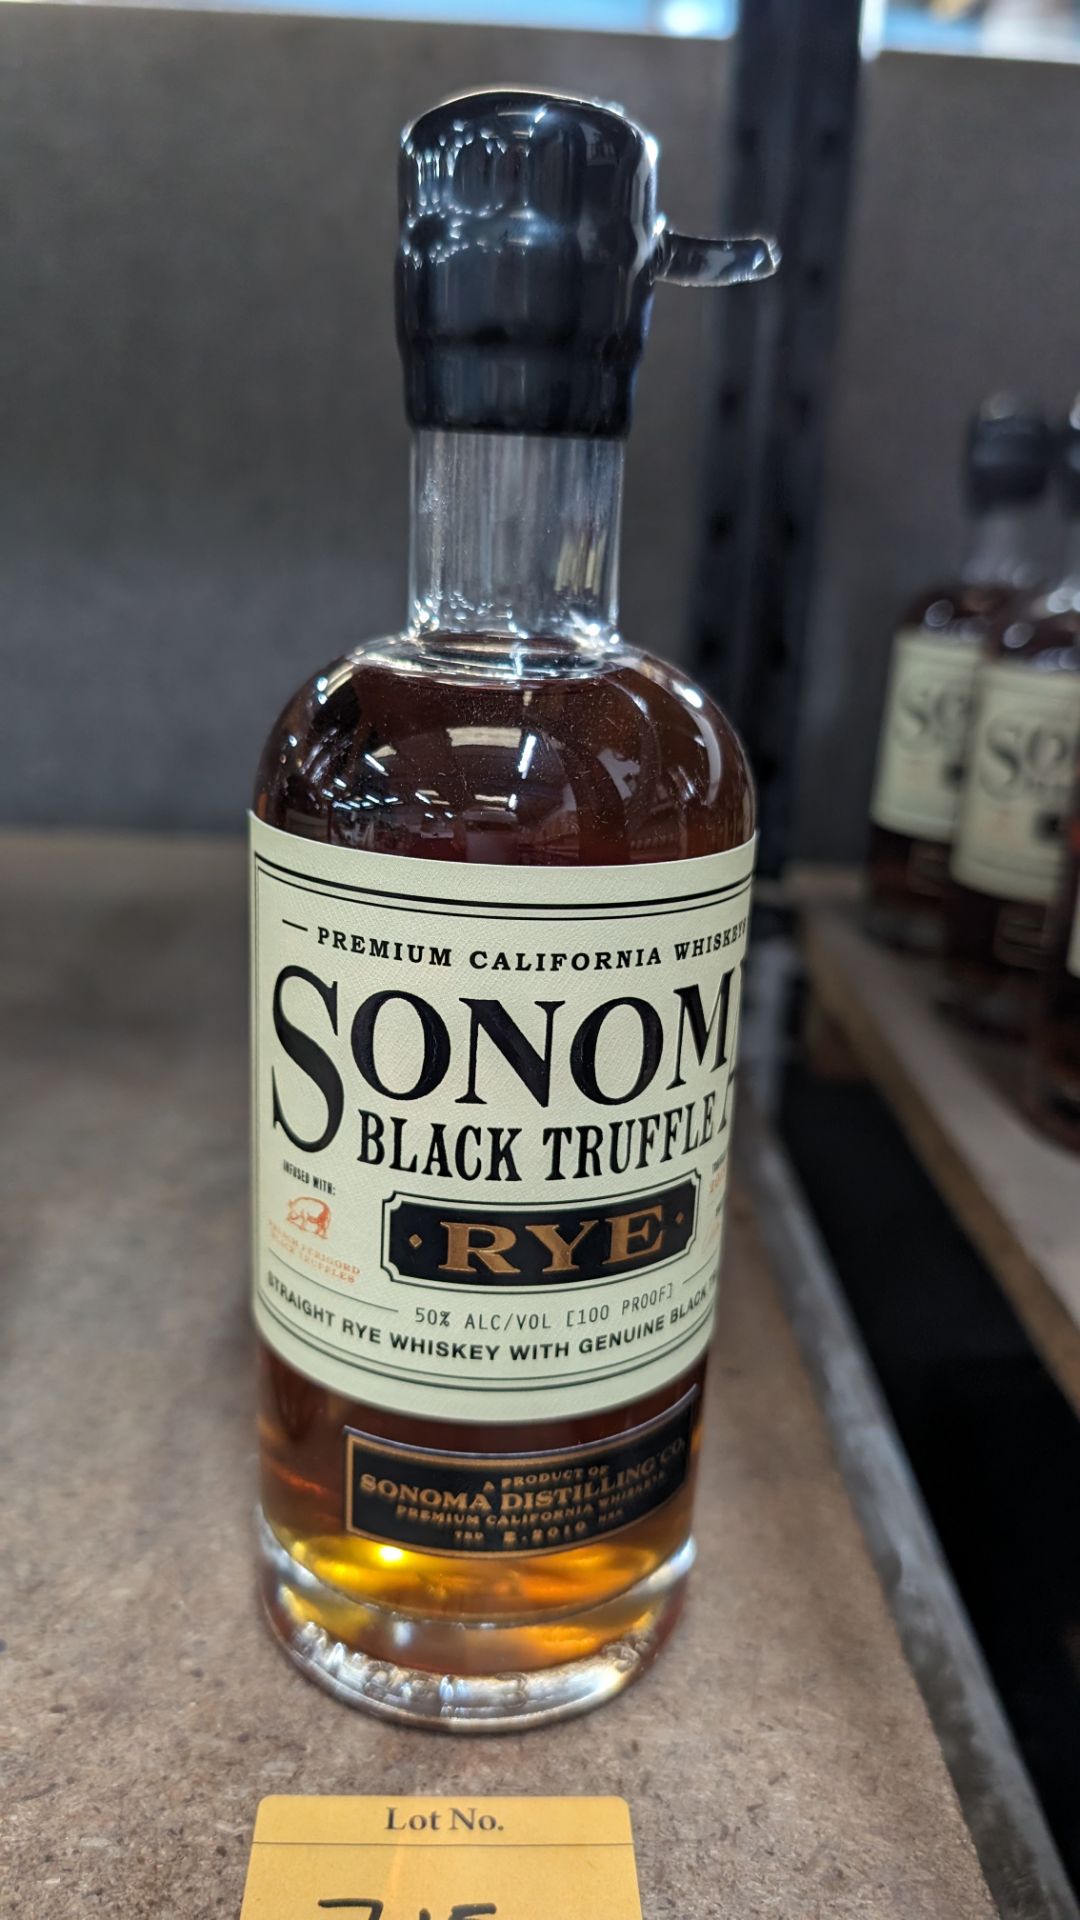 1 off 375ml bottle of Sonoma Black Truffle Rye Whiskey. 50% alc/vol (100 proof). Straight rye whis - Image 2 of 5